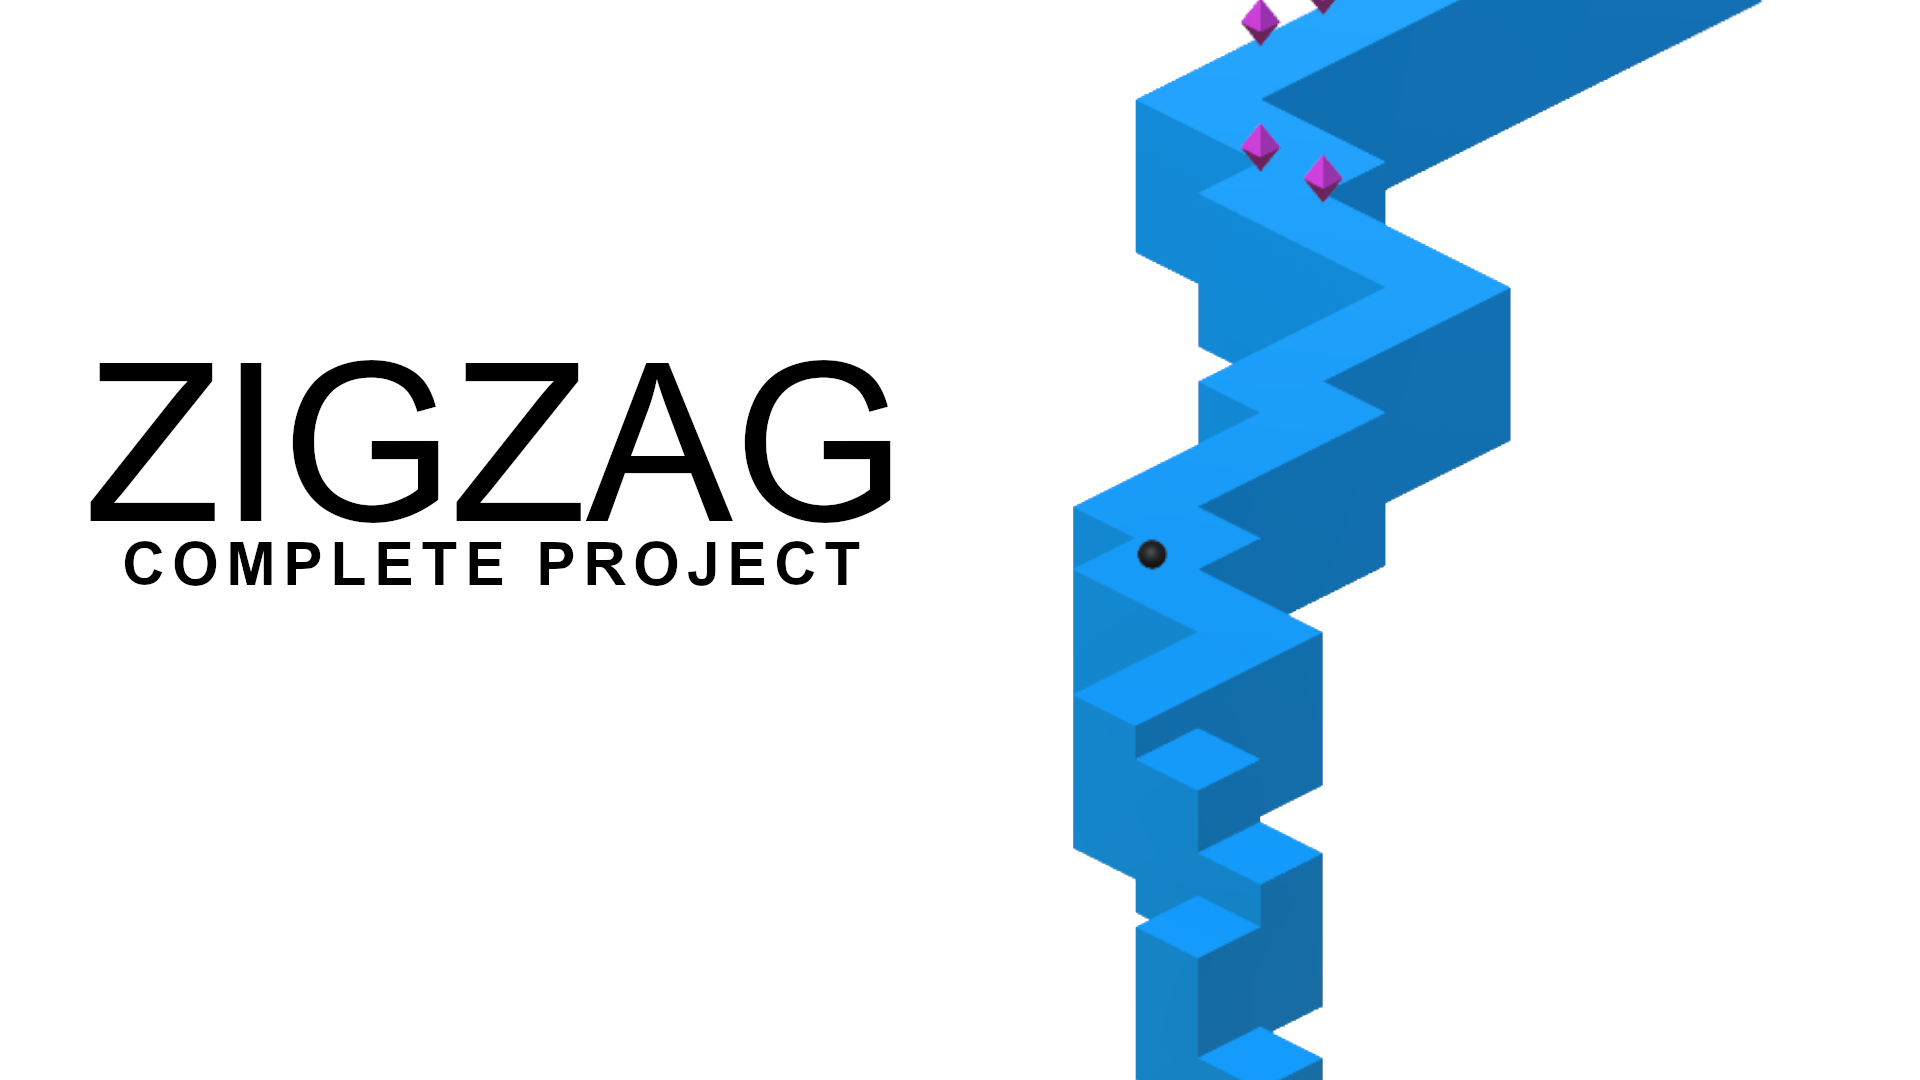 ZigZag: Complete Project